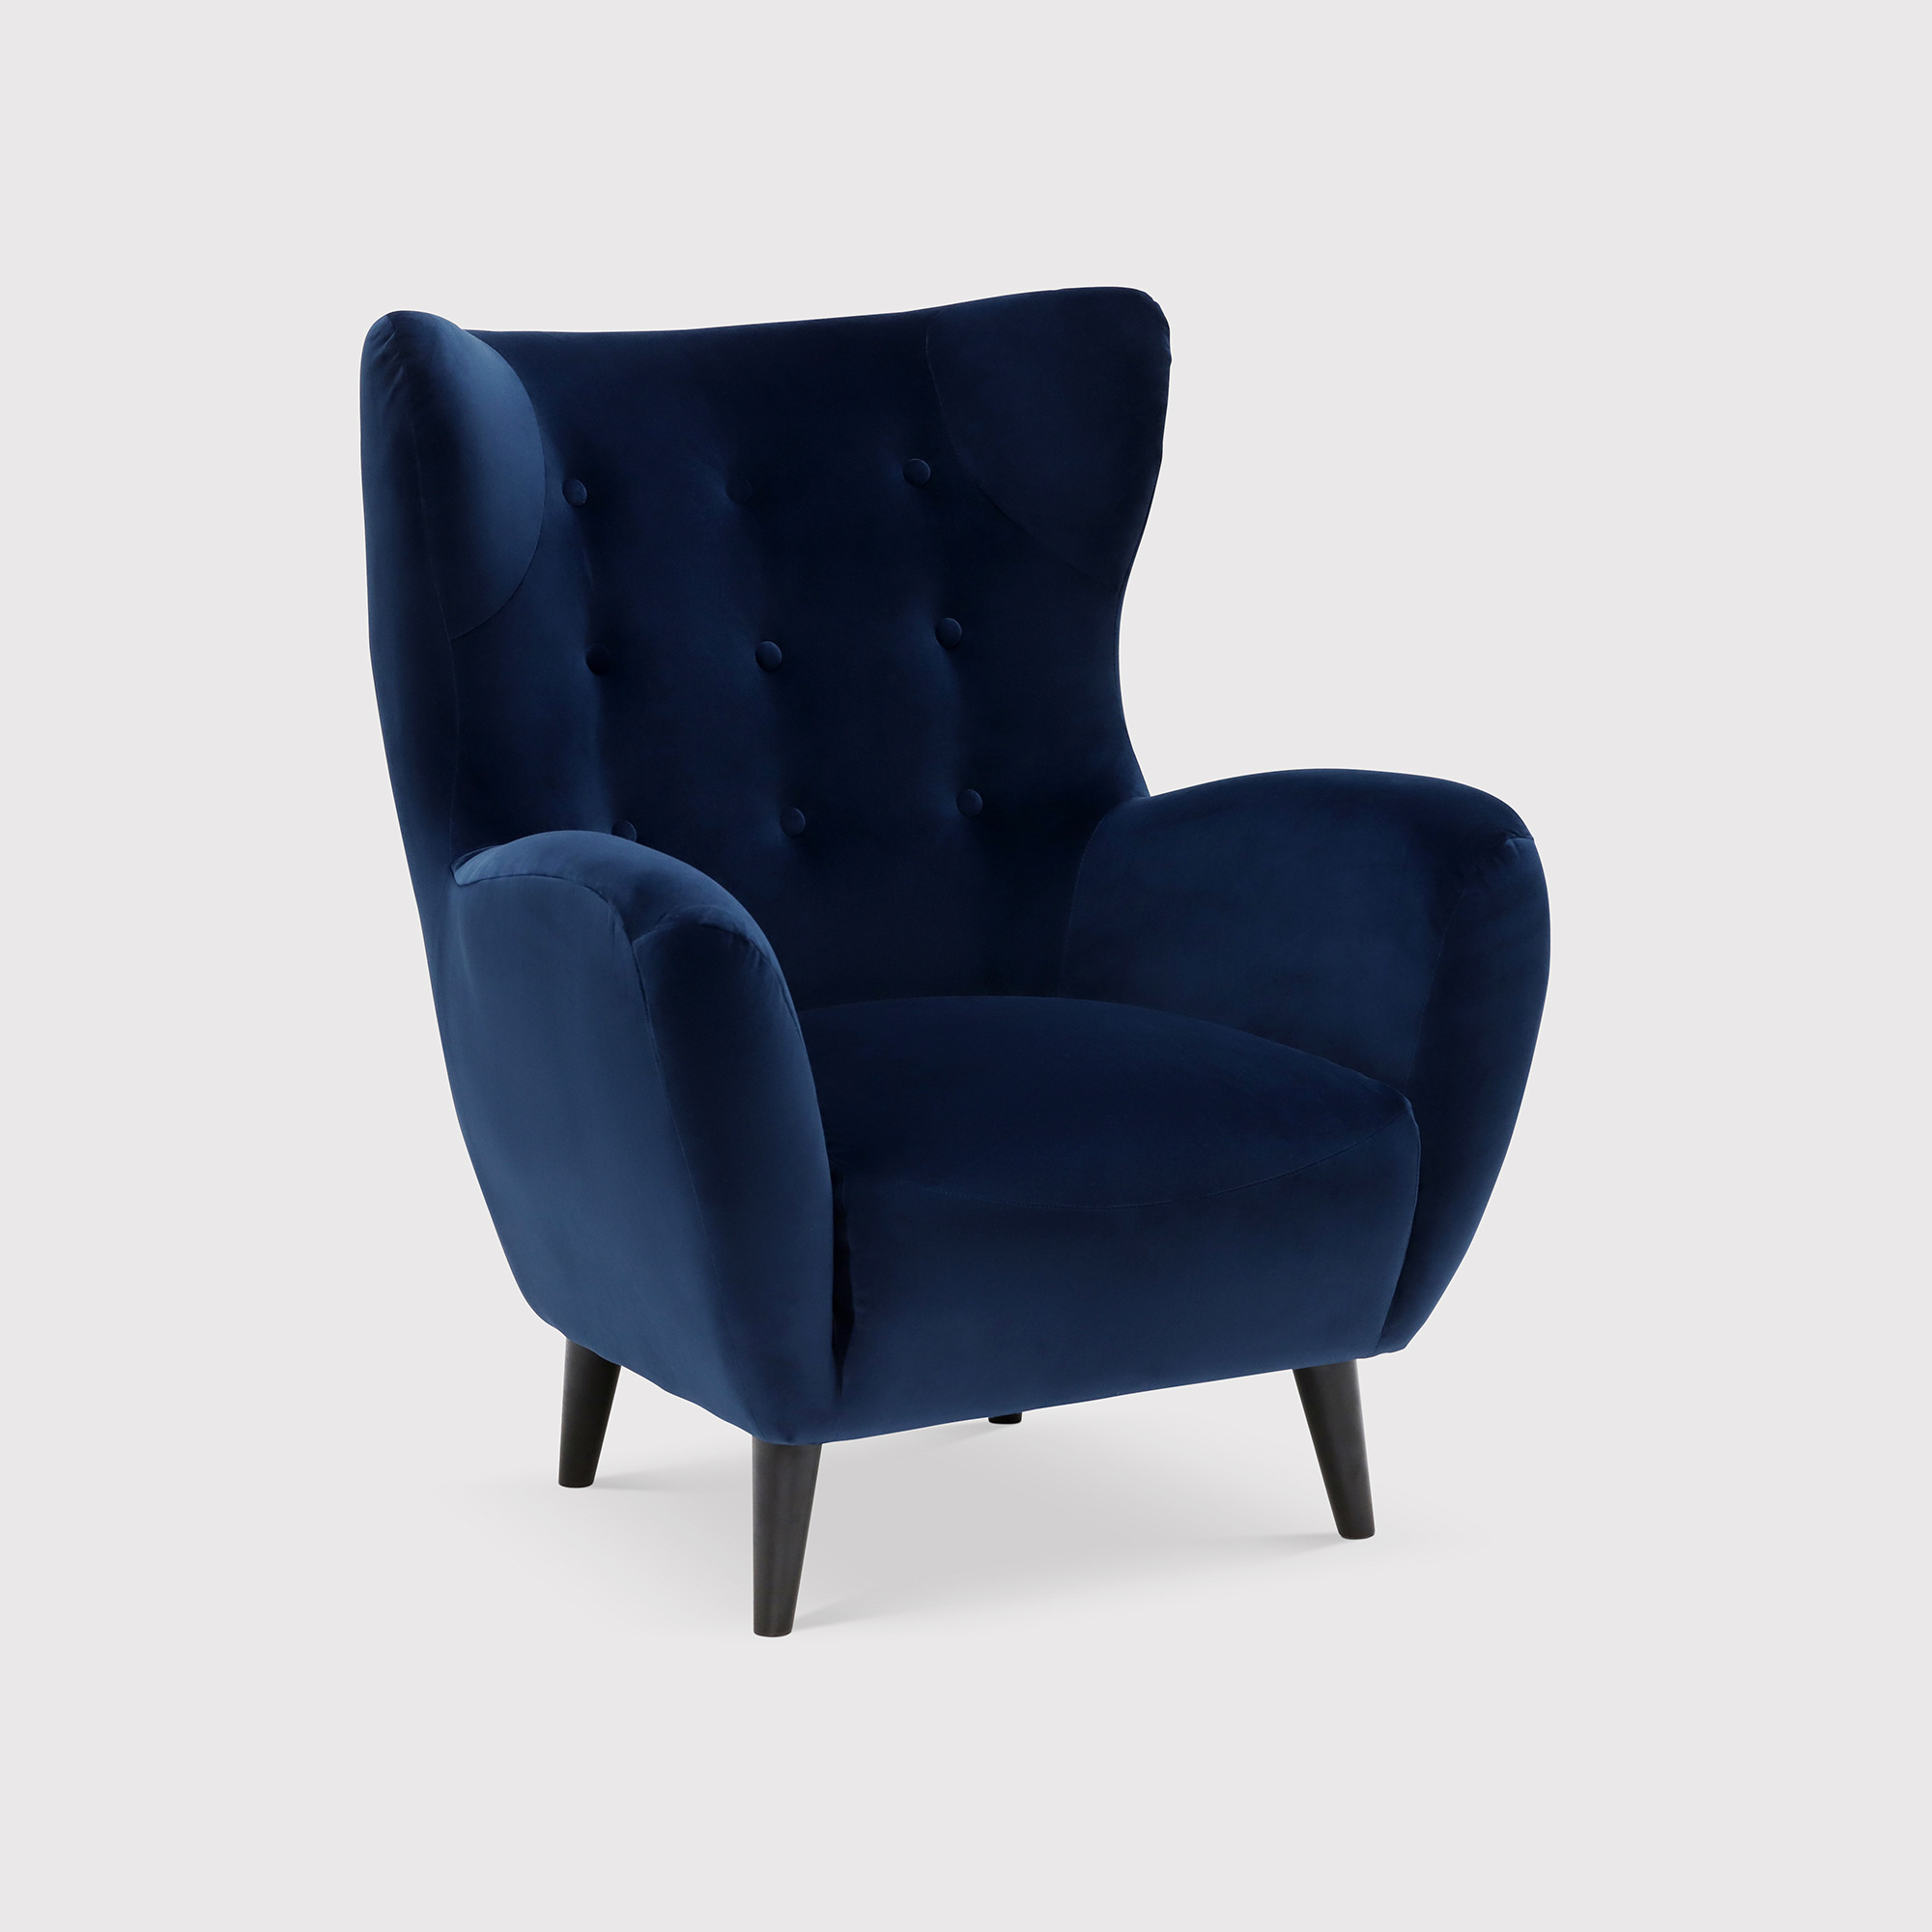 Delon Wing Chair, Navy Fabric - Barker & Stonehouse - image 1